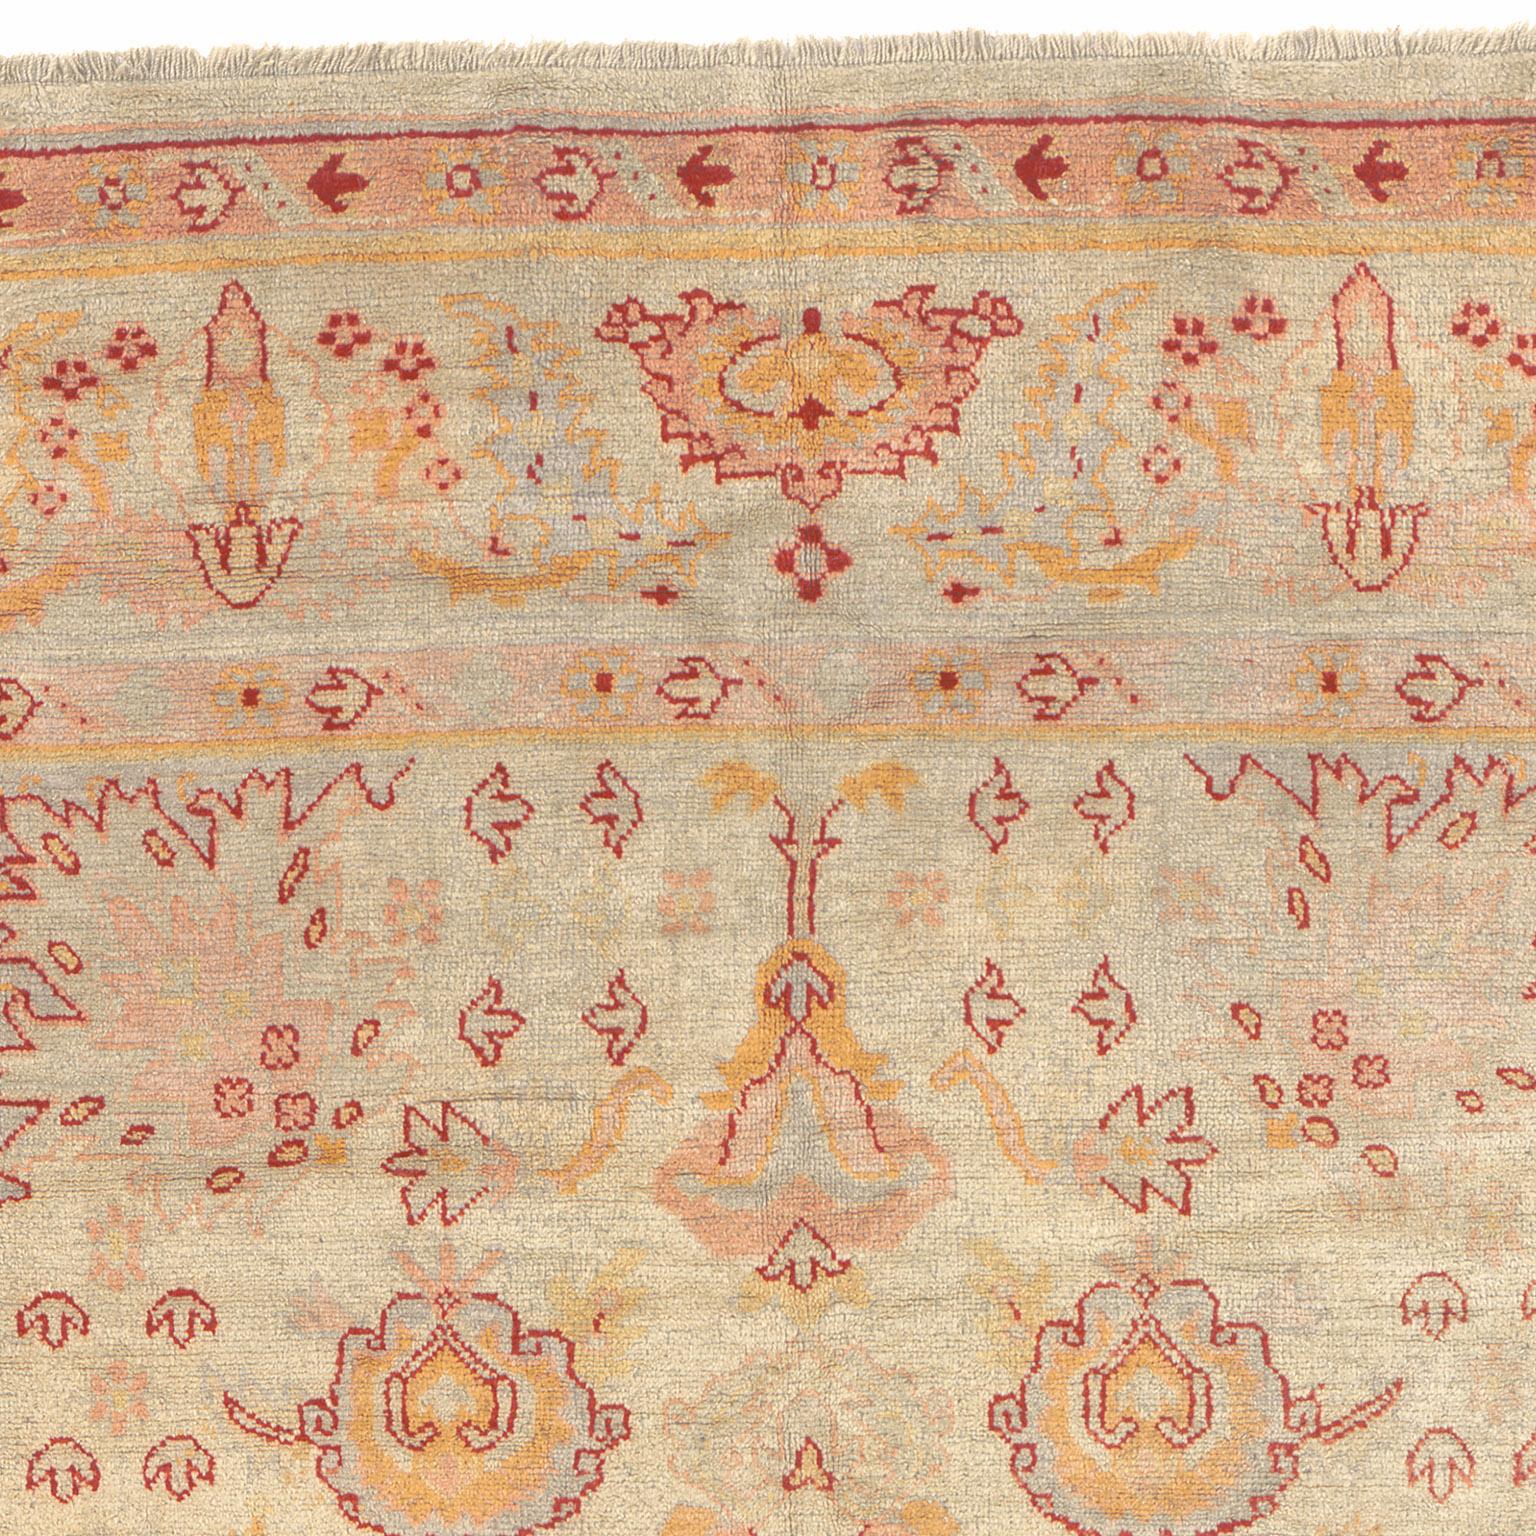 Early 20th Century Turkish Oushak Rug In Good Condition For Sale In New York, NY